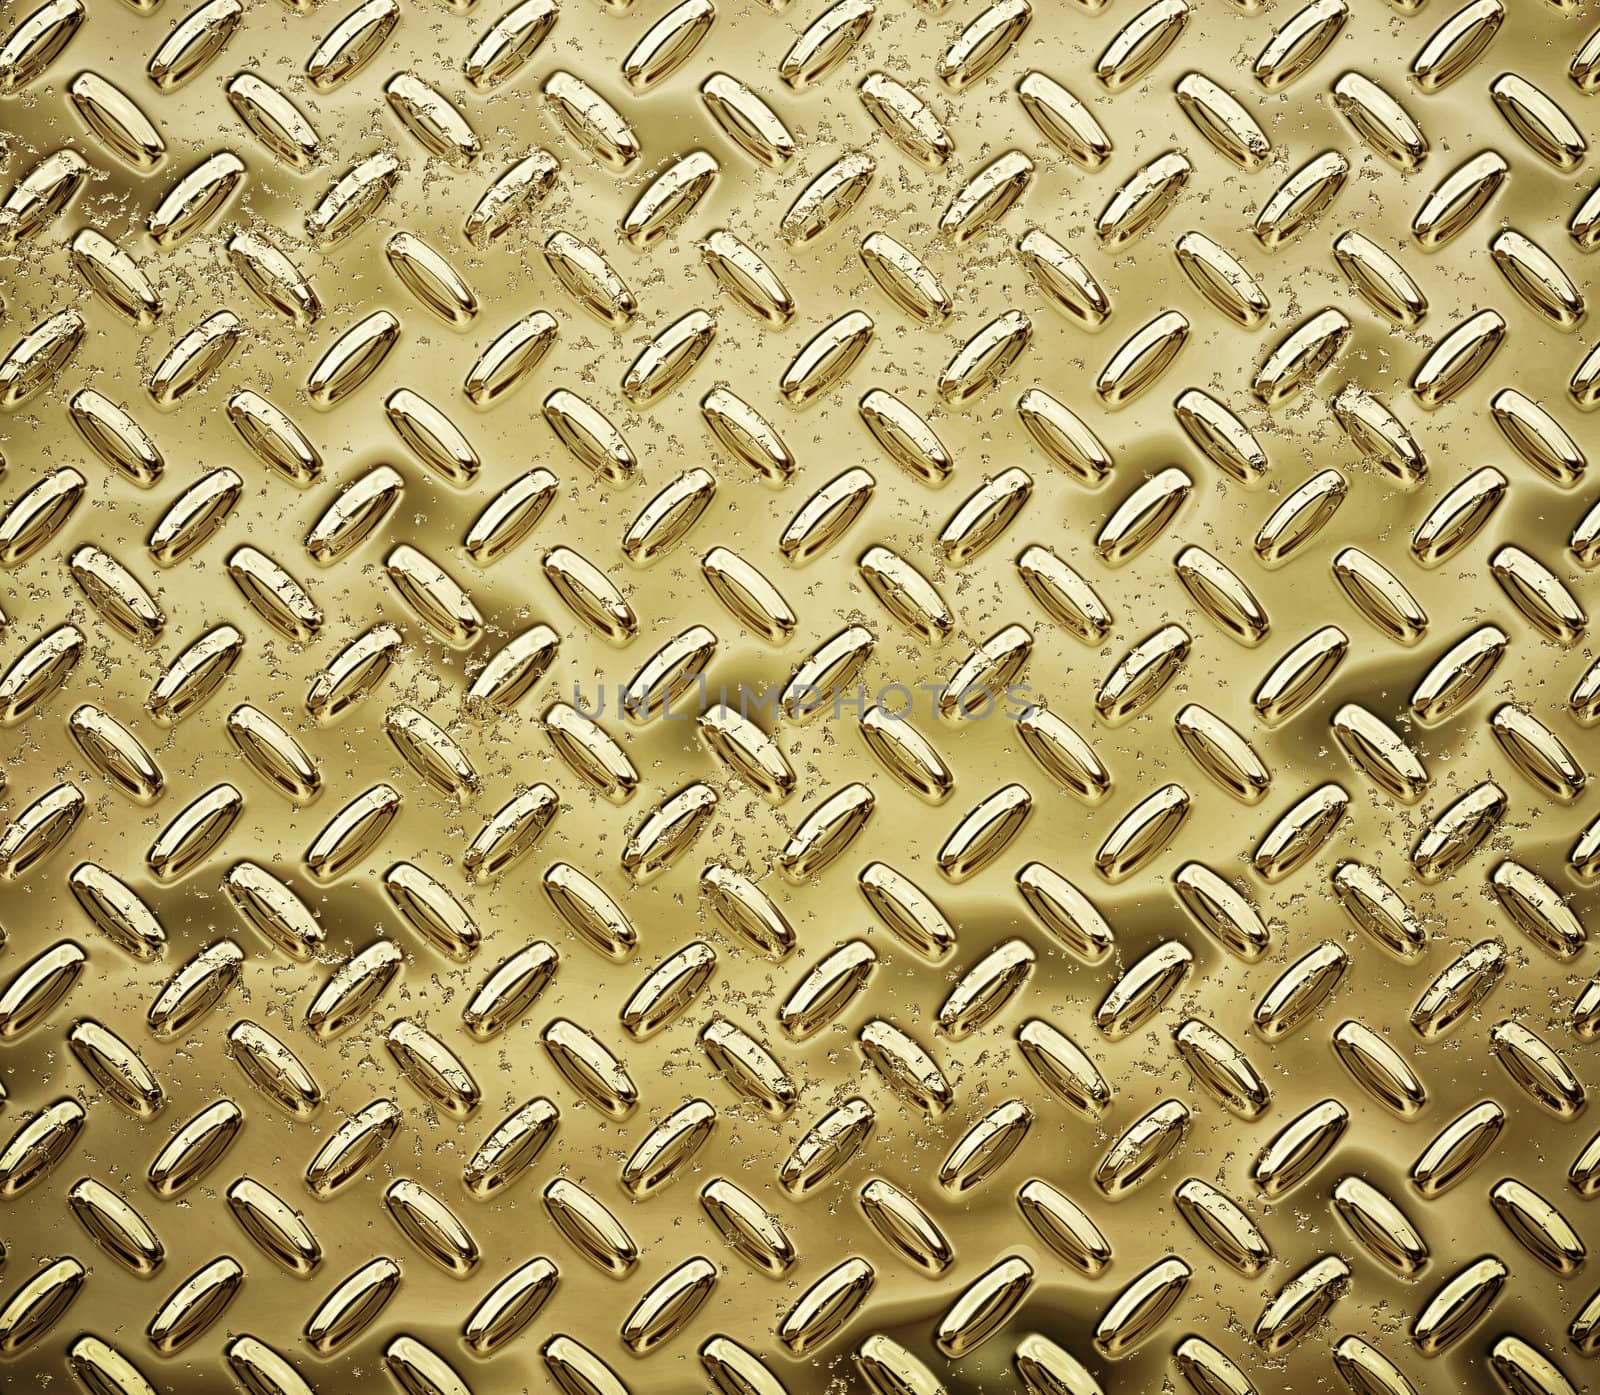 rough gold diamond plate by clearviewstock